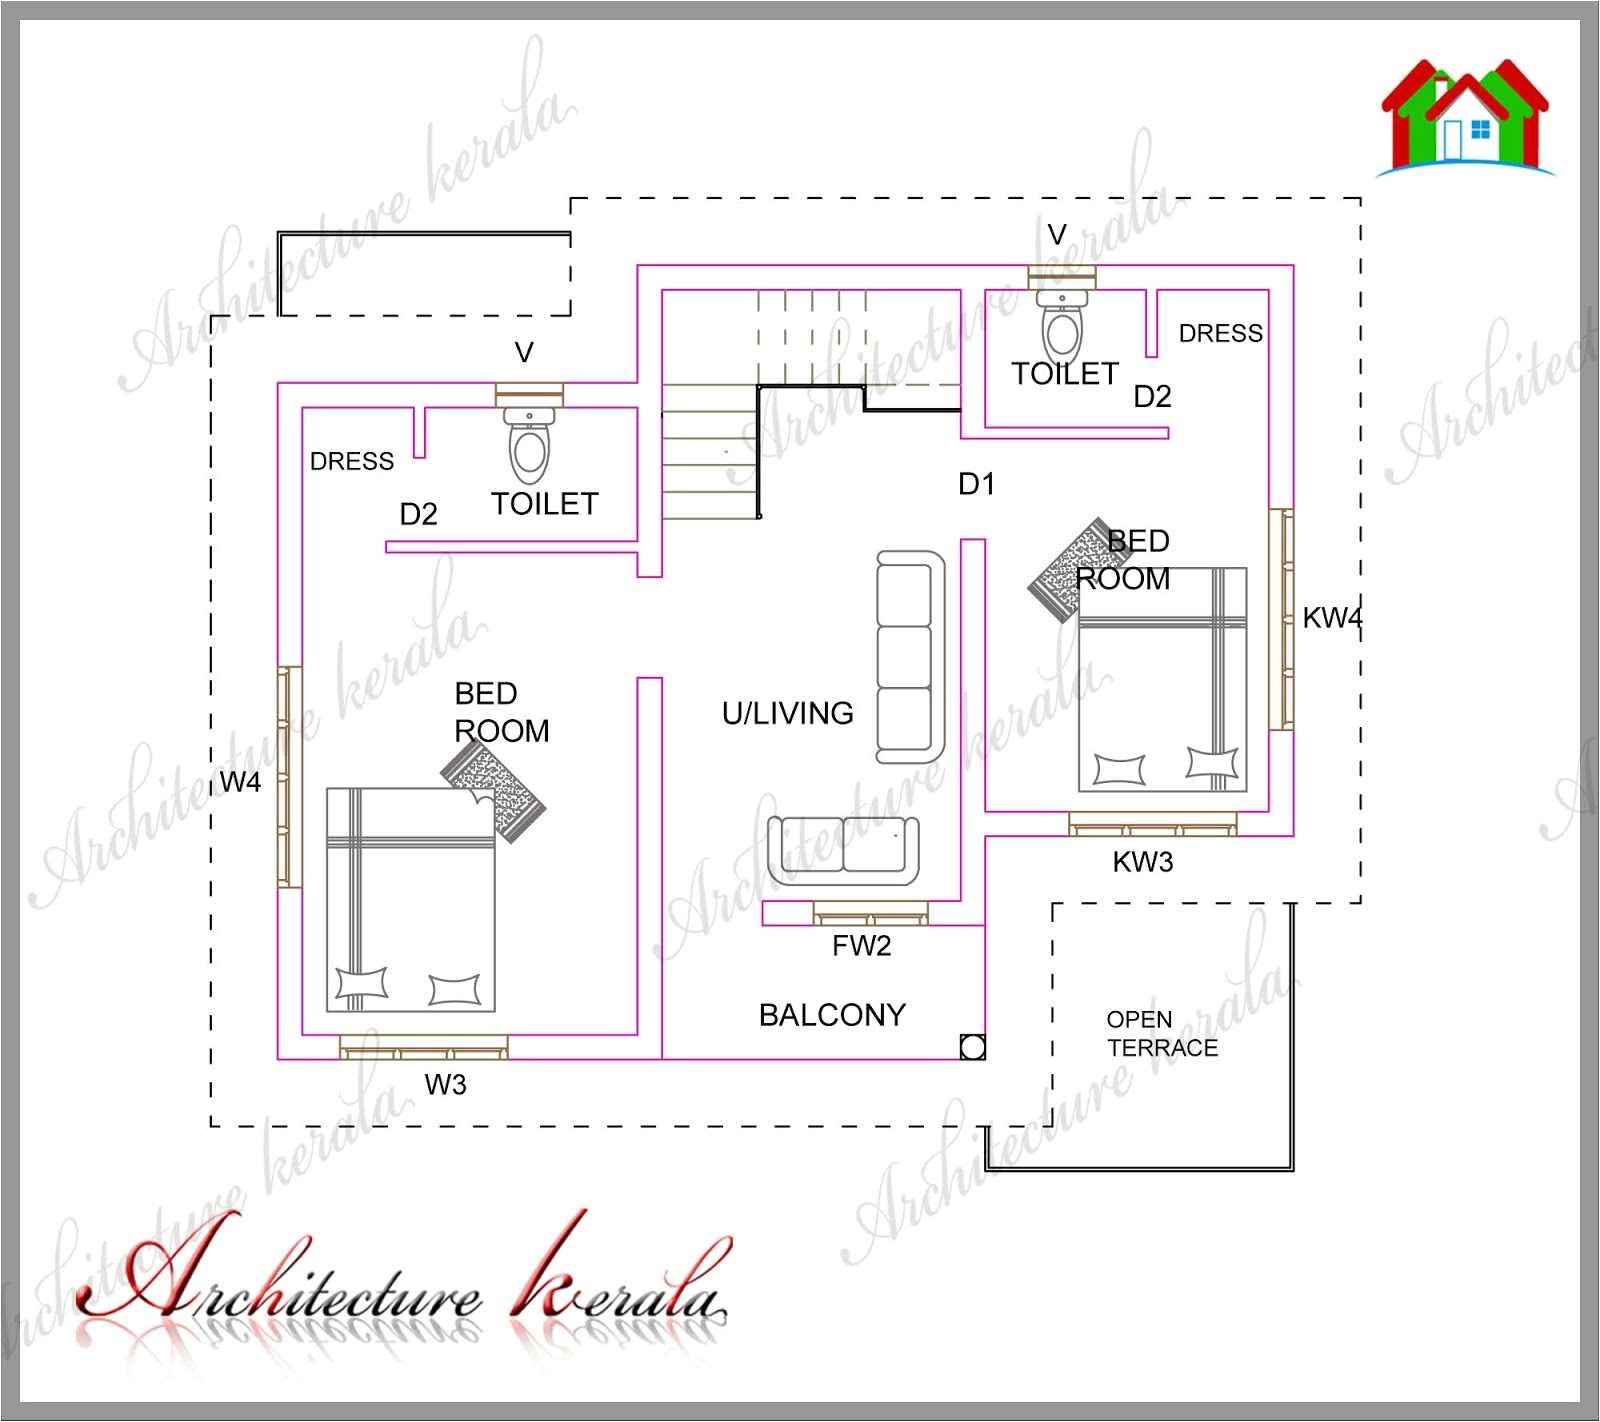 House Plans Less Than 800 Sq Ft House Plans Under 600 Square Feet or House Plans Less Than